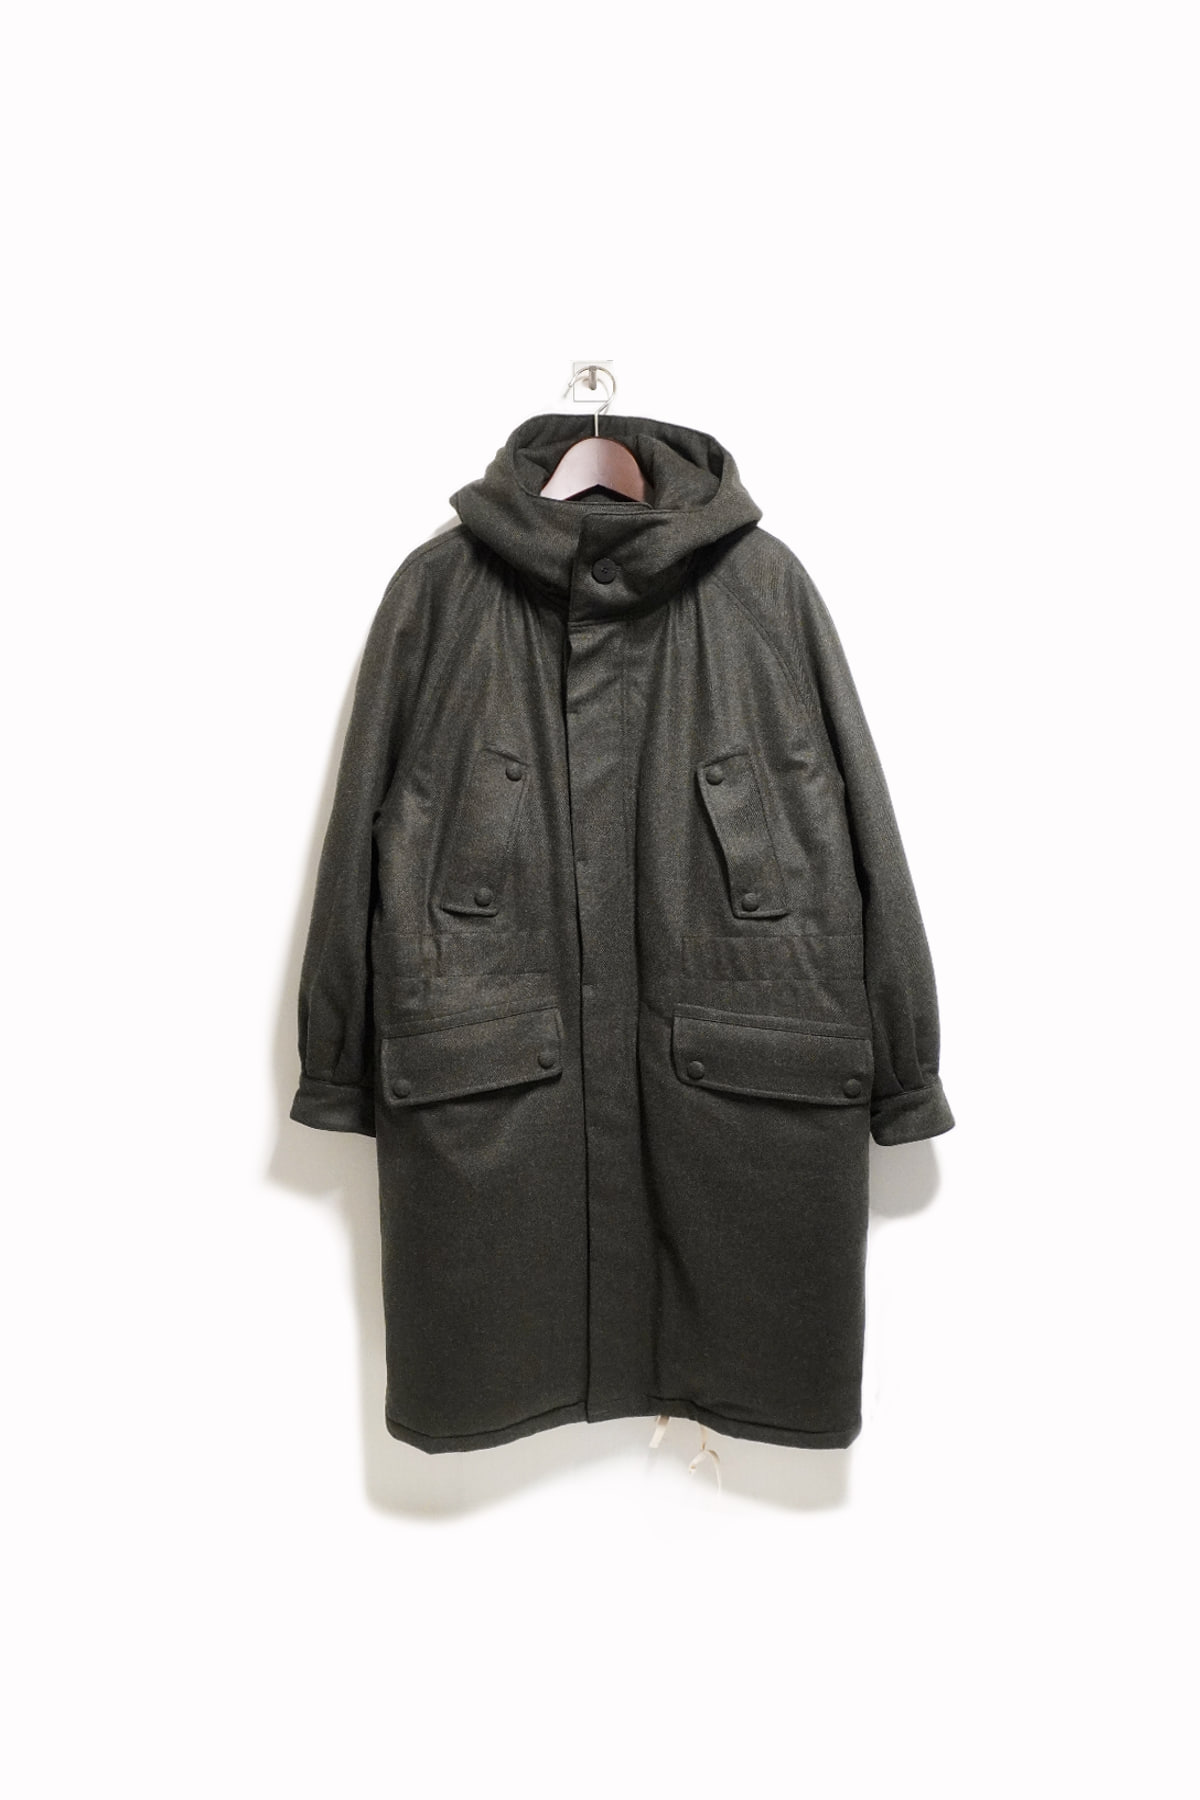 [DOCUMENT] Light Weighted Padded Wool Parka - Khaki